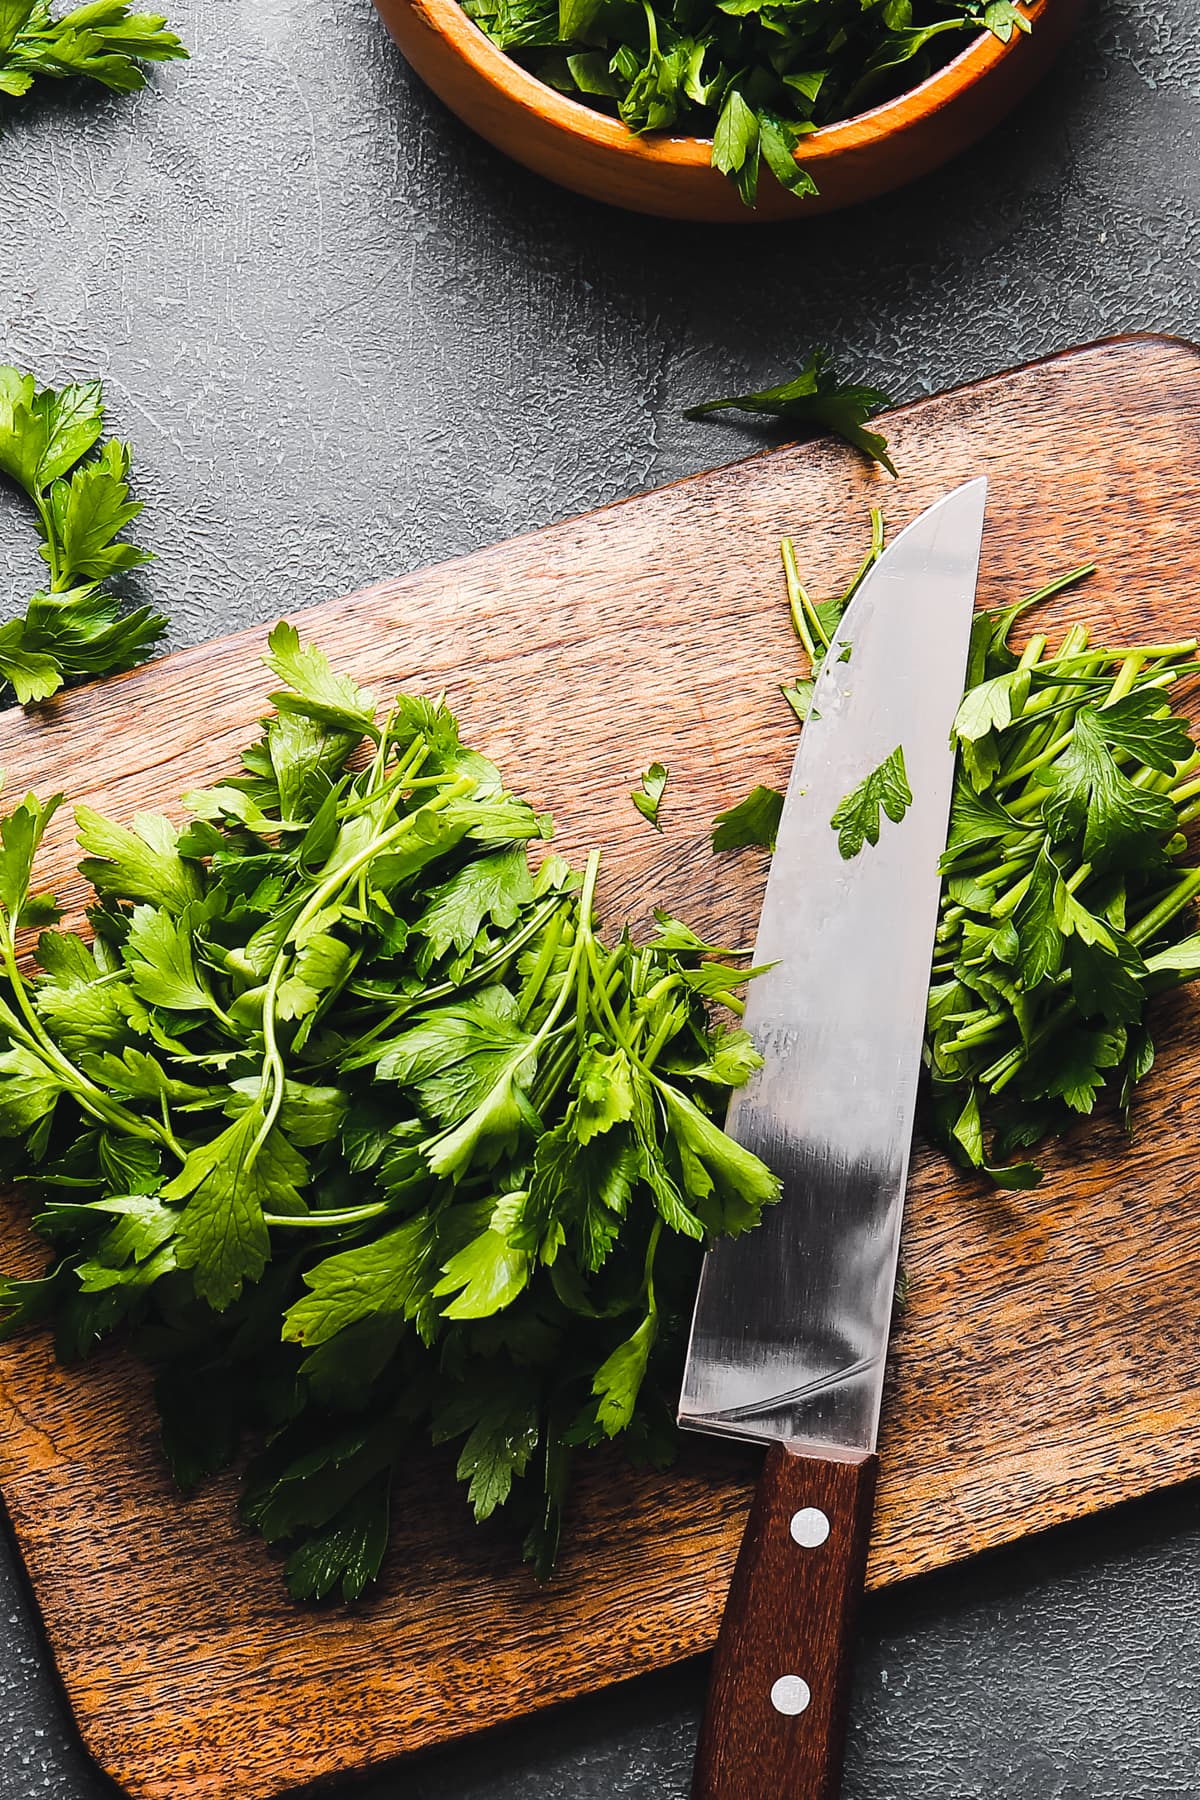 Chopping parsley on a wooden board.